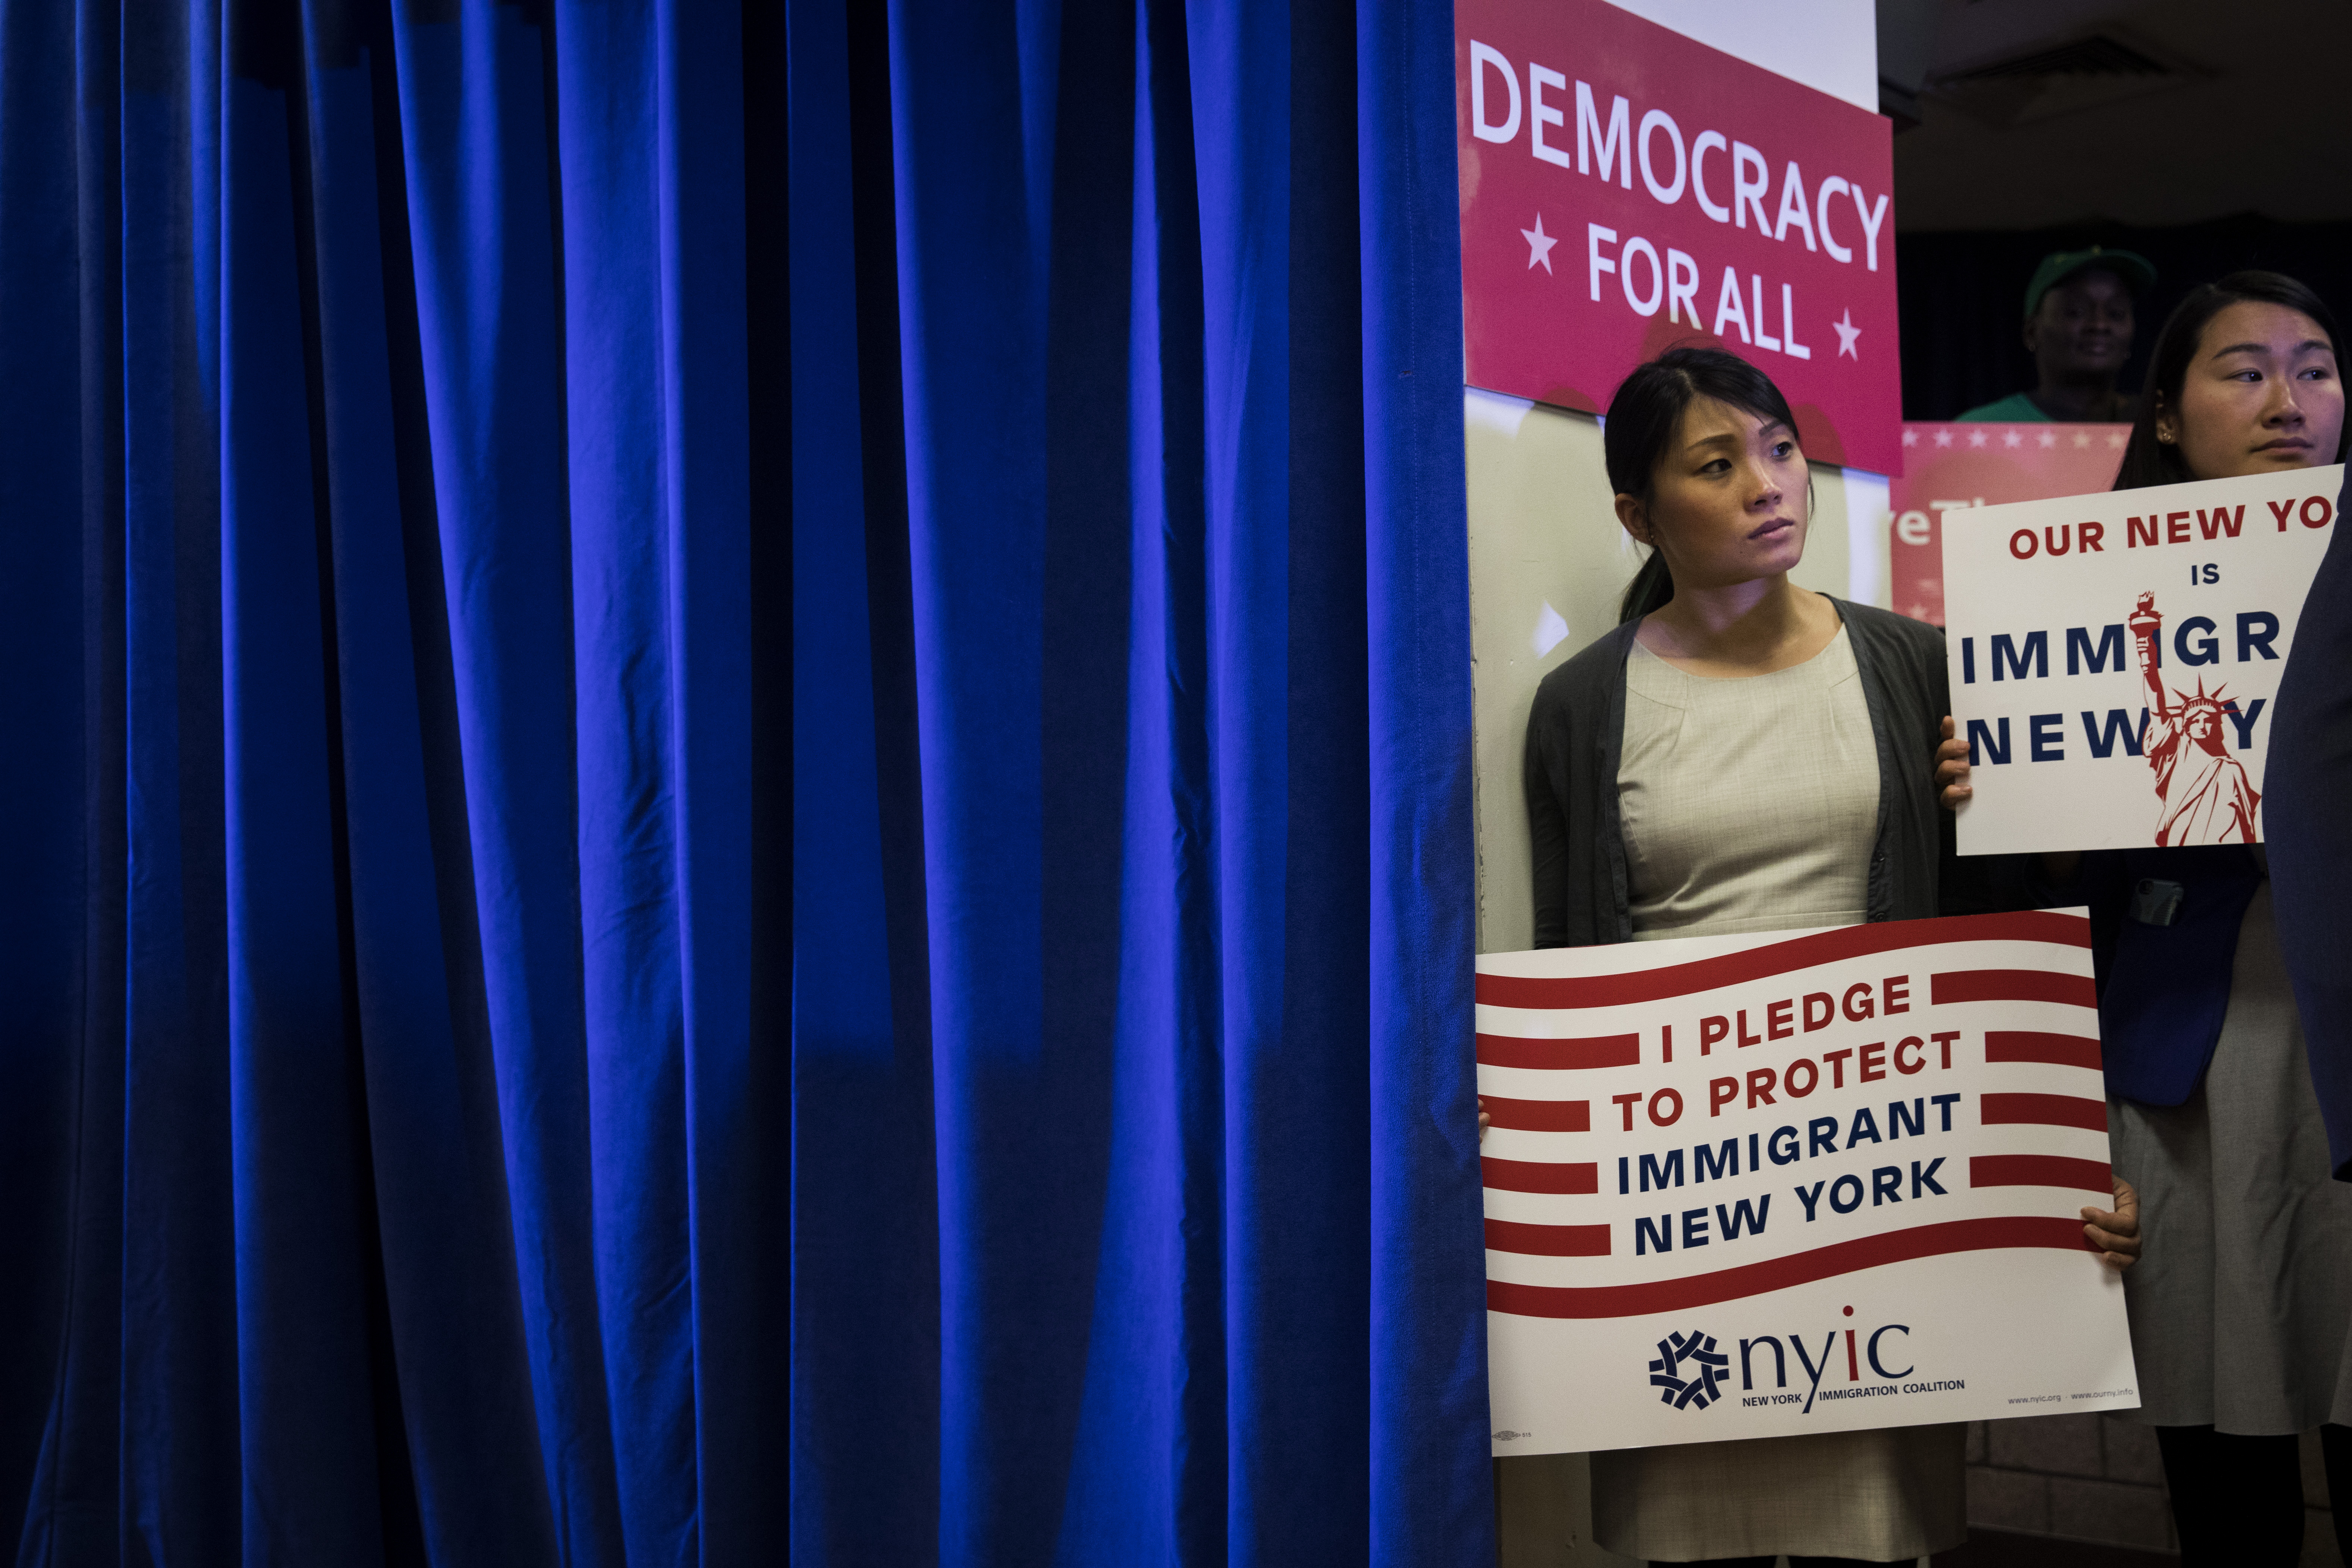 NEW YORK, NY - APRIL 3: Activists look on during a press conference to announce a multi-state lawsuit to block the Trump administration from adding a question about citizenship to the 2020 Census form, at the headquarters of District Council 37, New York City's largest public employee union, April 3, 2018 in New York City. (Photo by Drew Angerer/Getty Images)